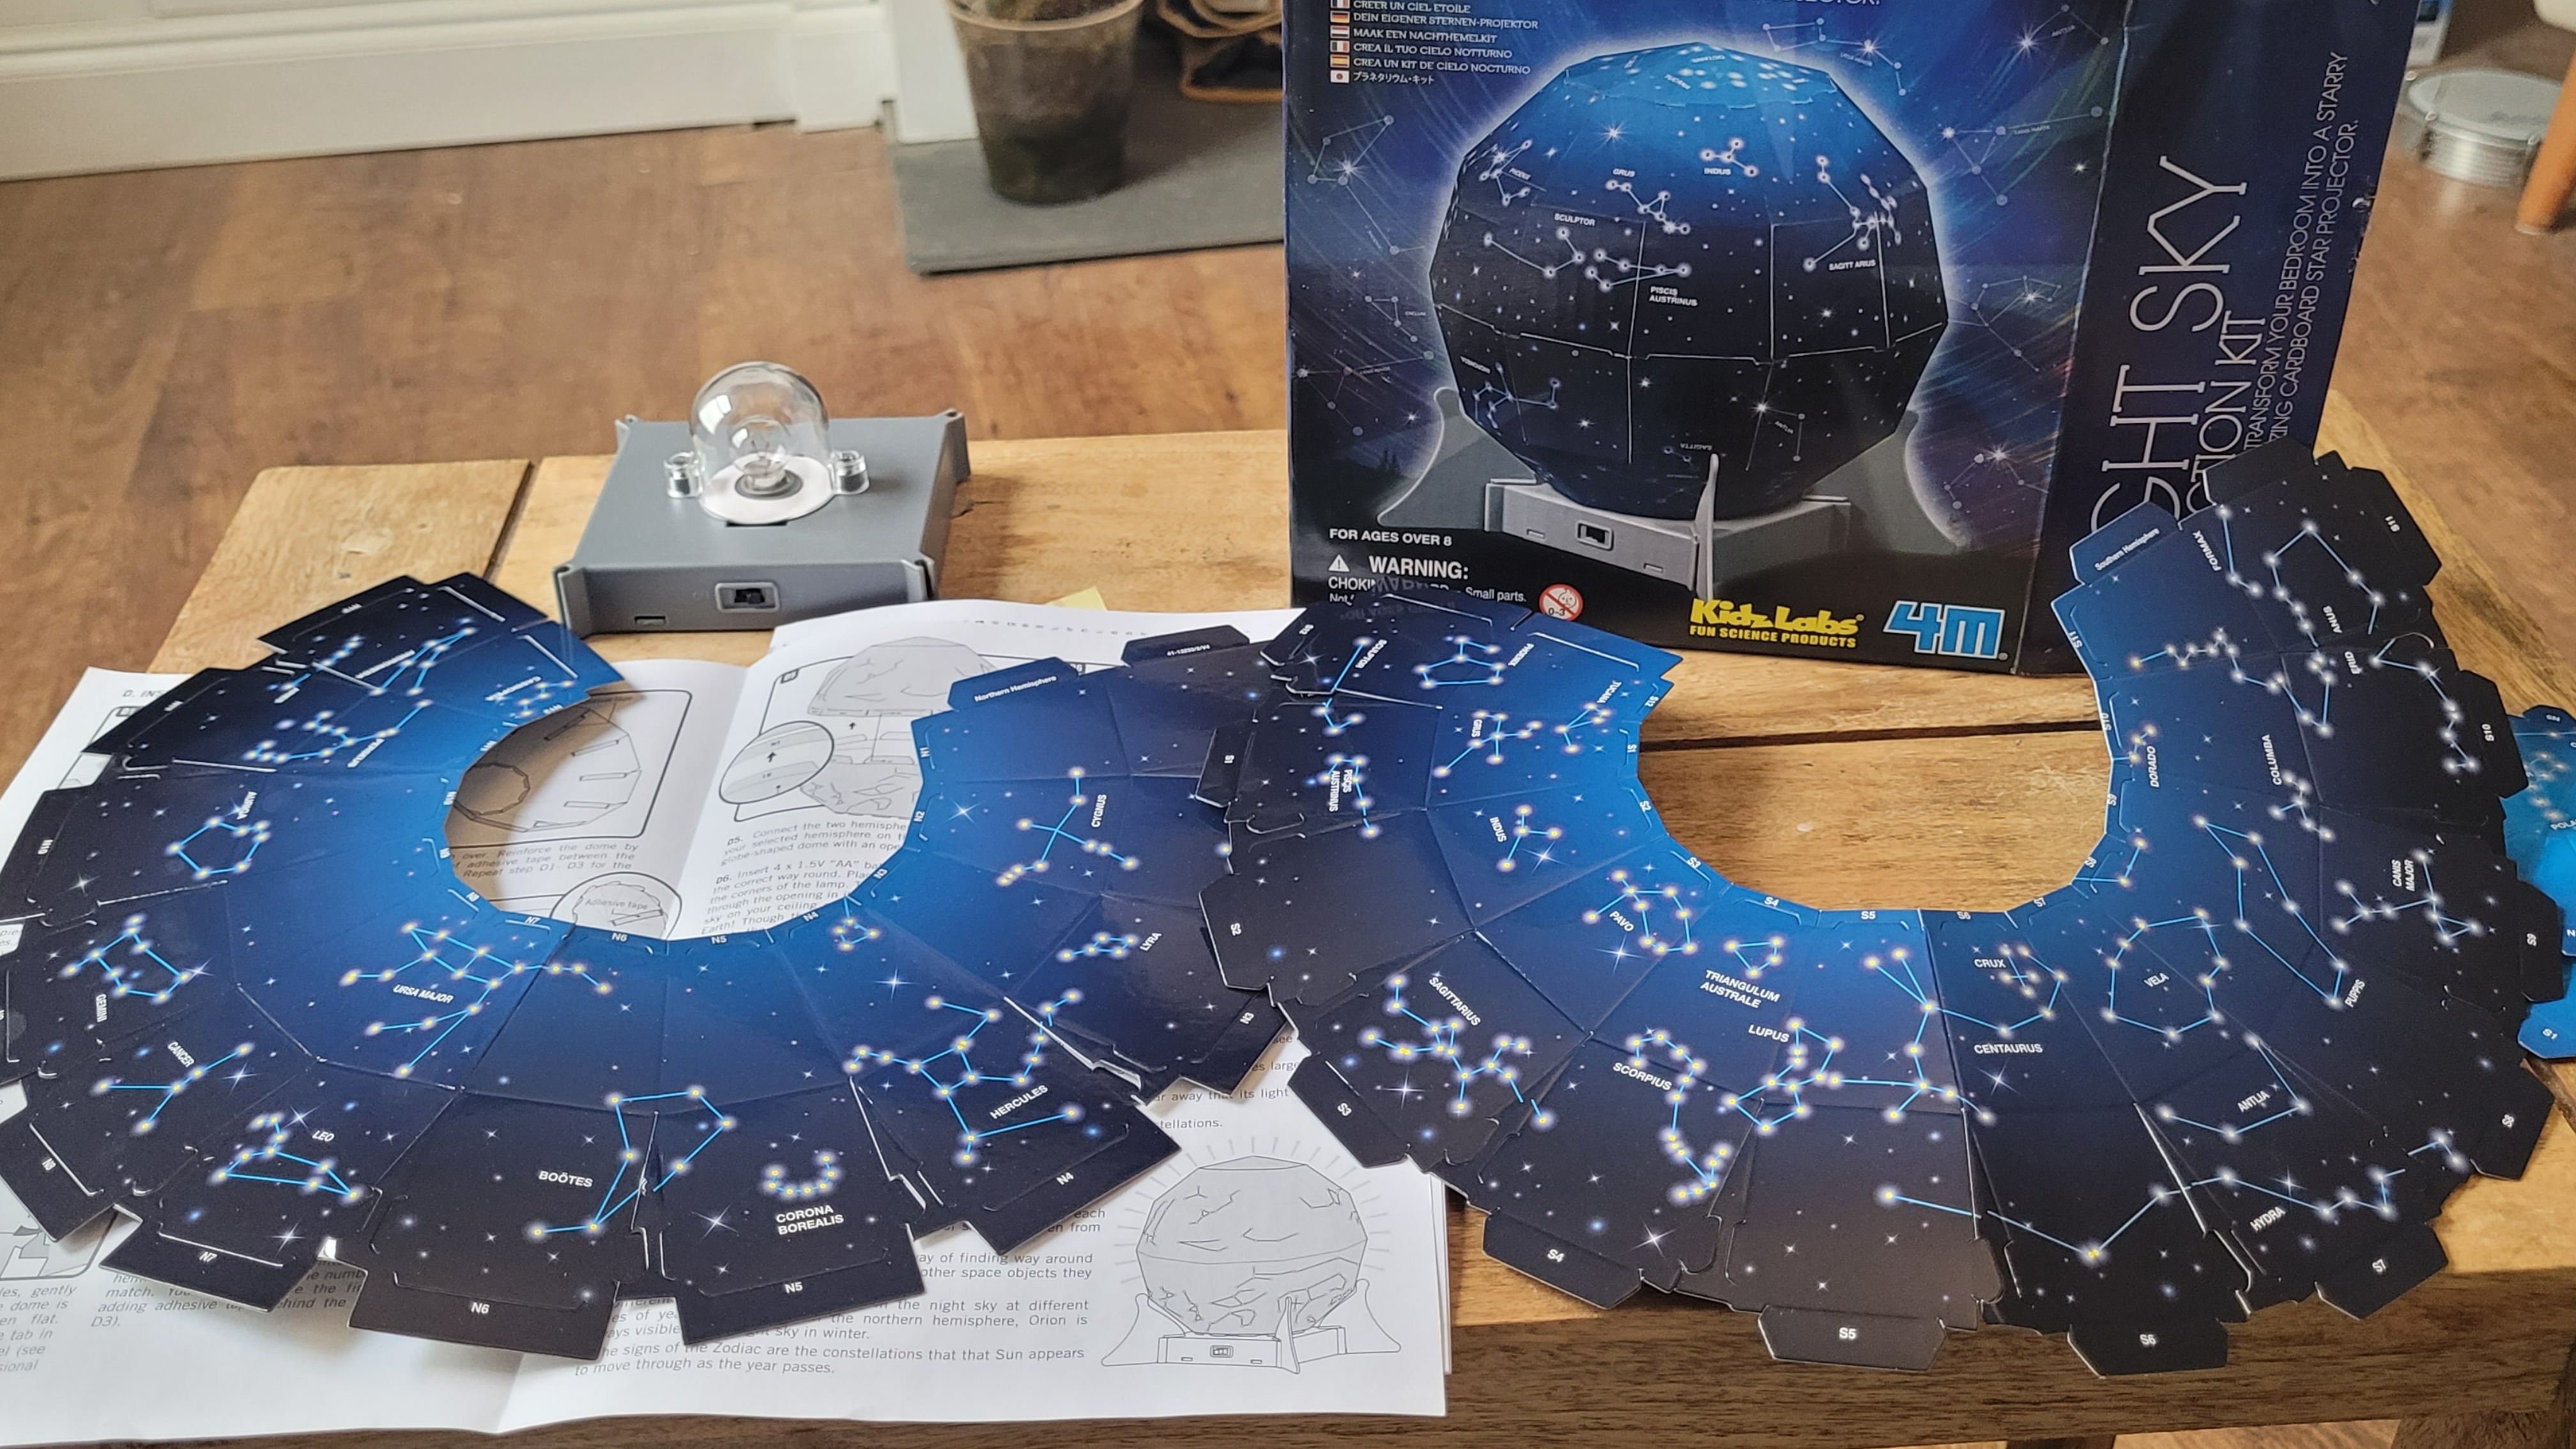 The contents of the Create A Night Sky Kit is displayed on a wooden table